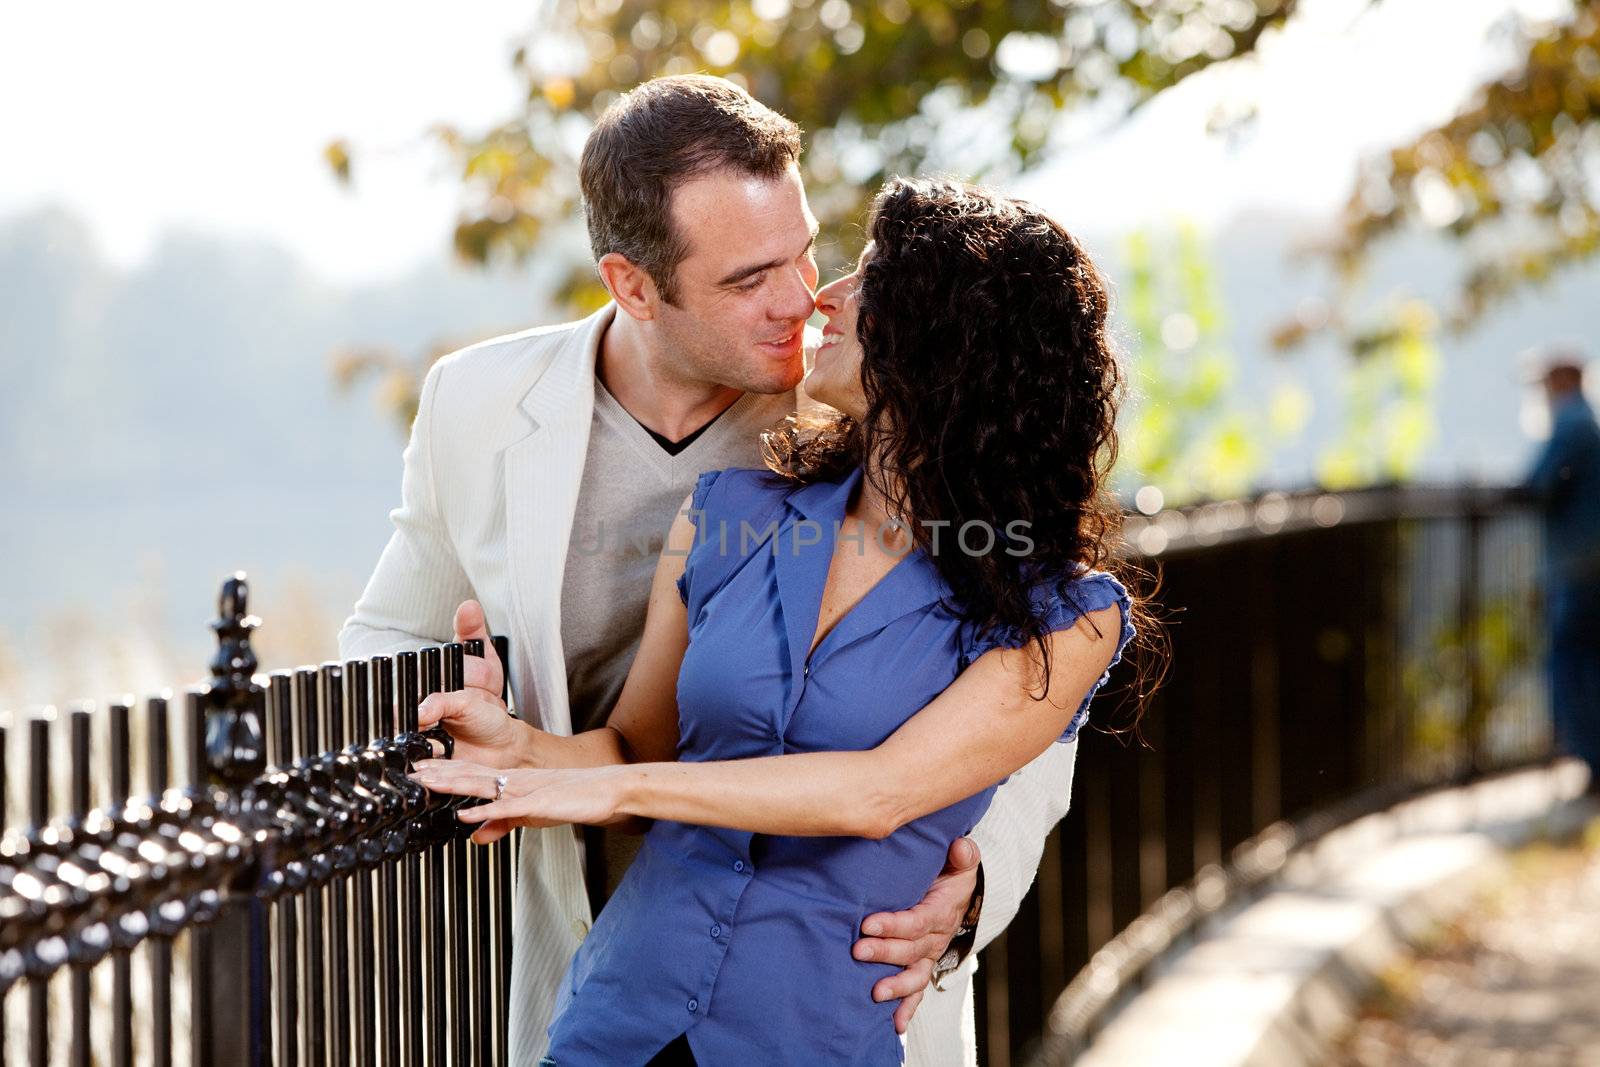 A happy couple kissing in the park on a beautiful day